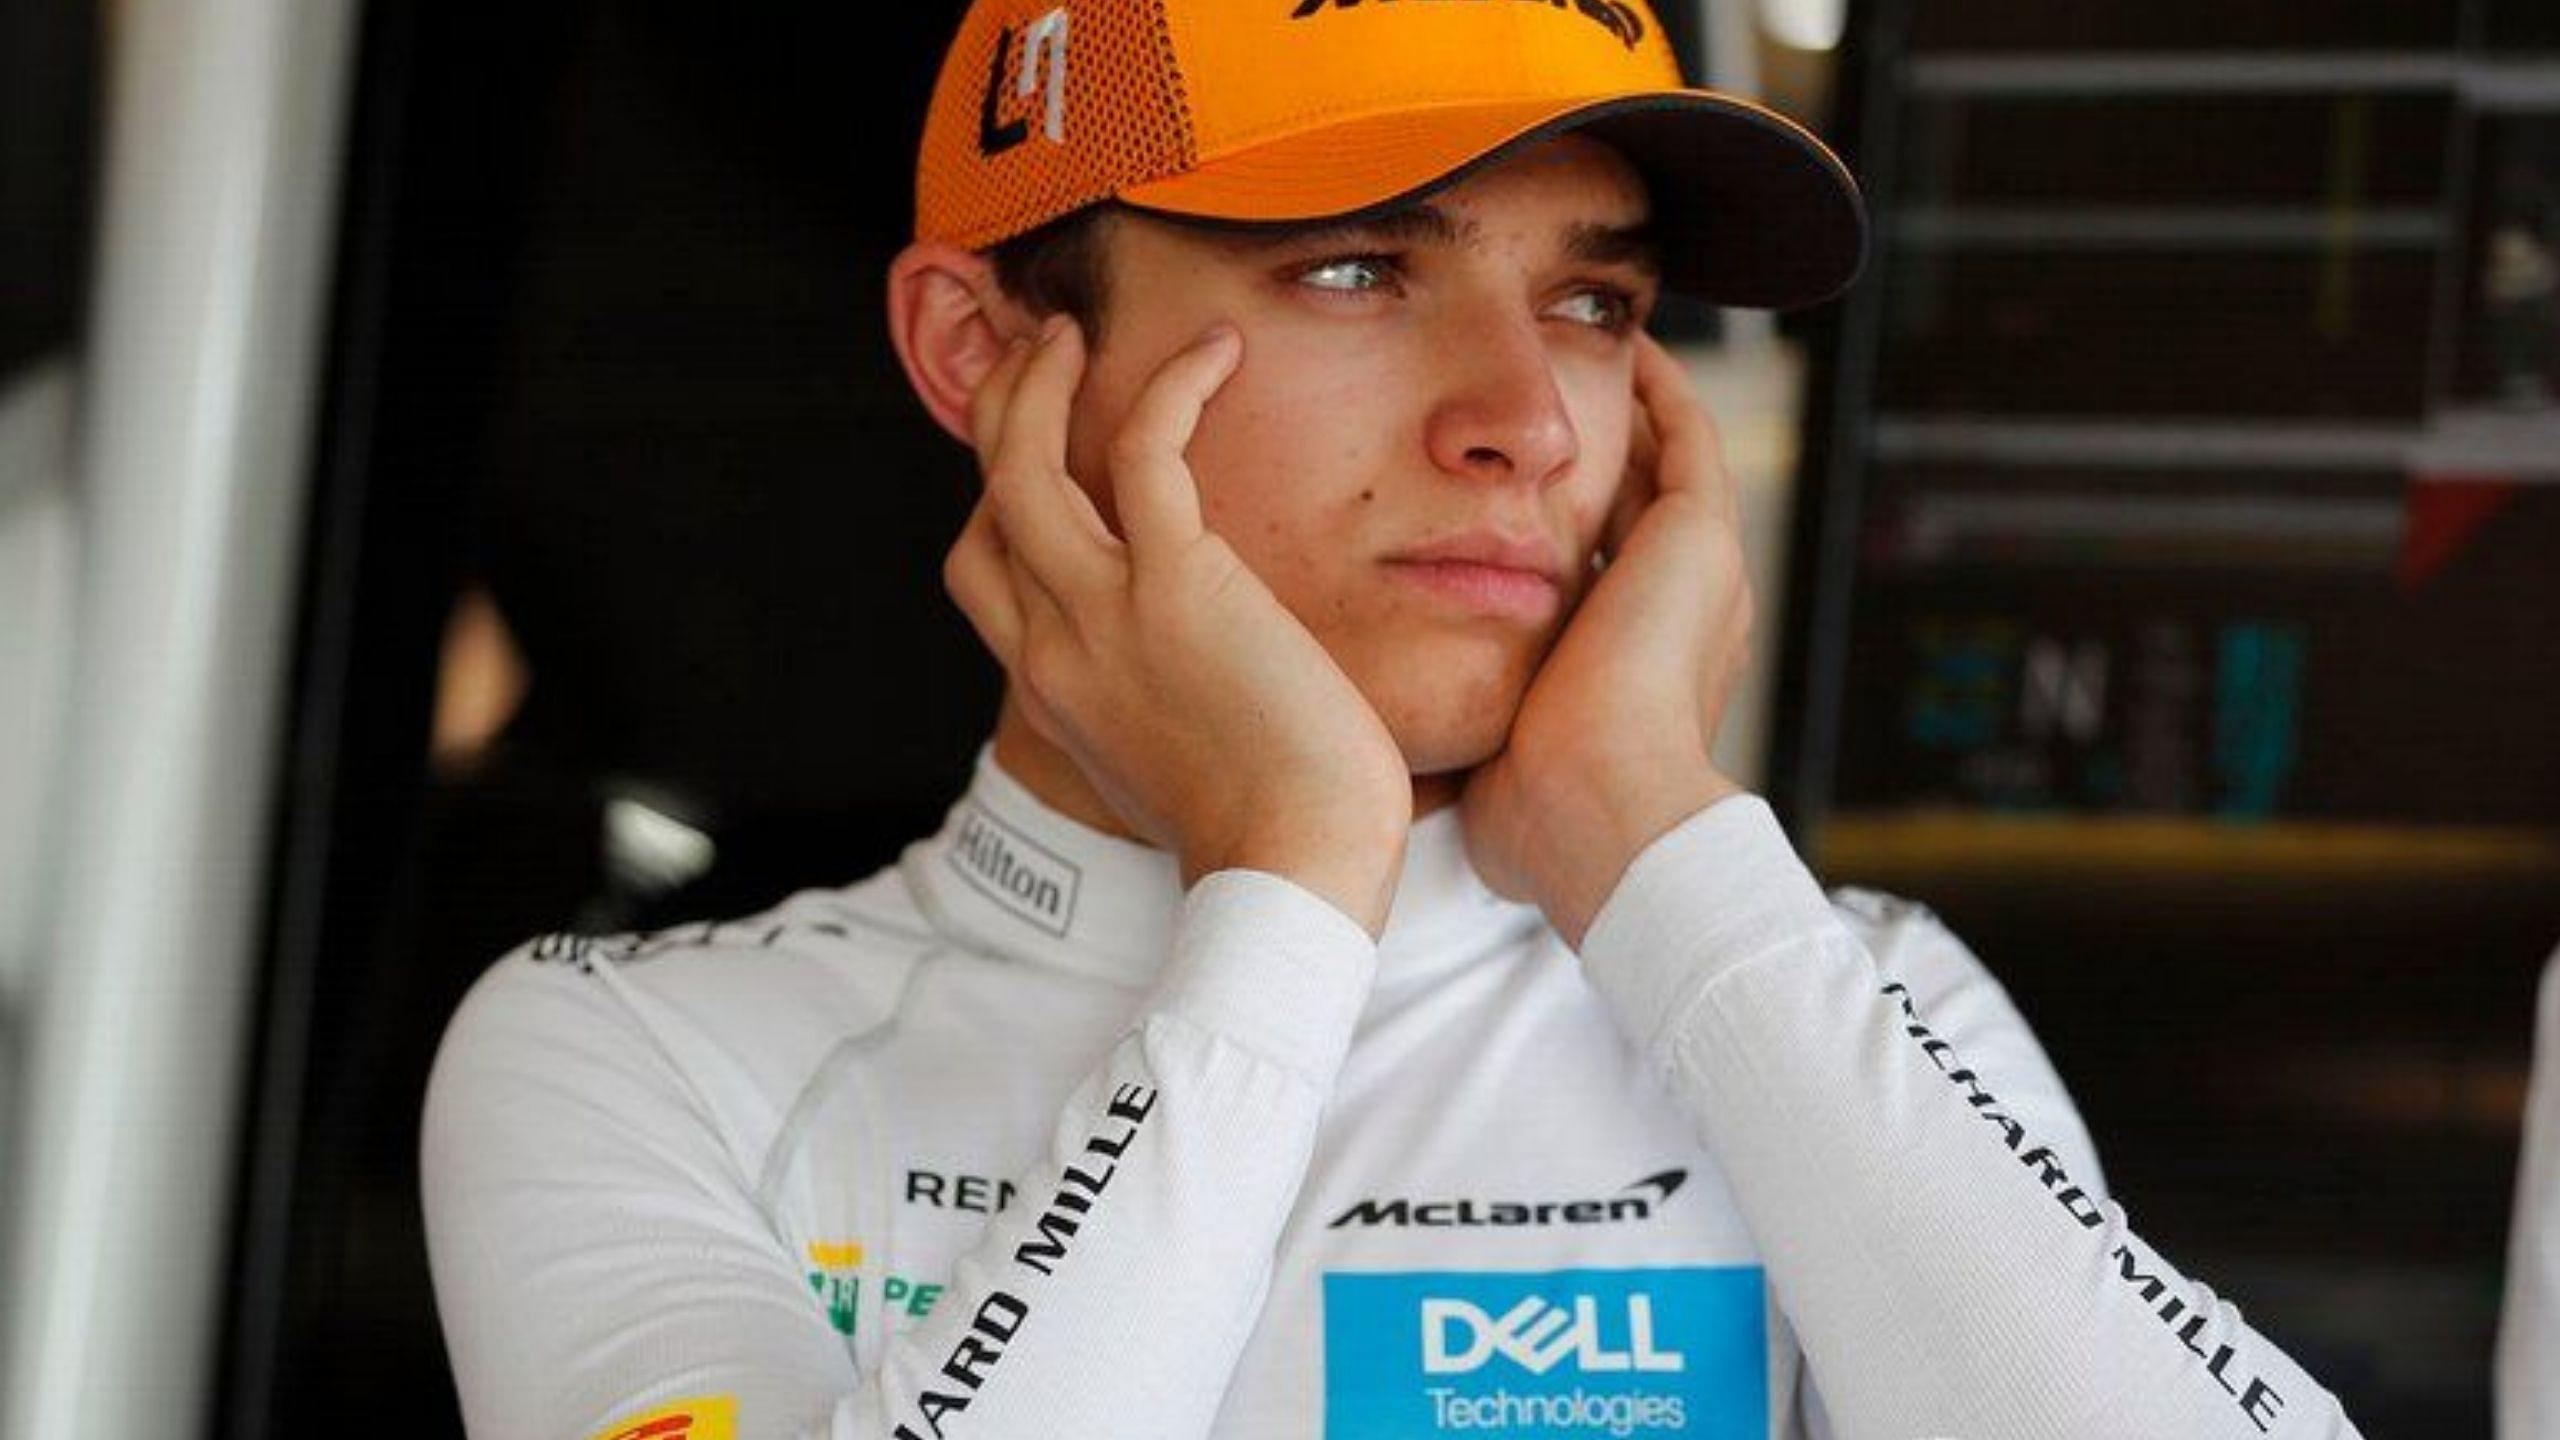 "Yesterday I lost my sense of taste and smell" - Lando Norris tests positive for Covid-19 in Dubai